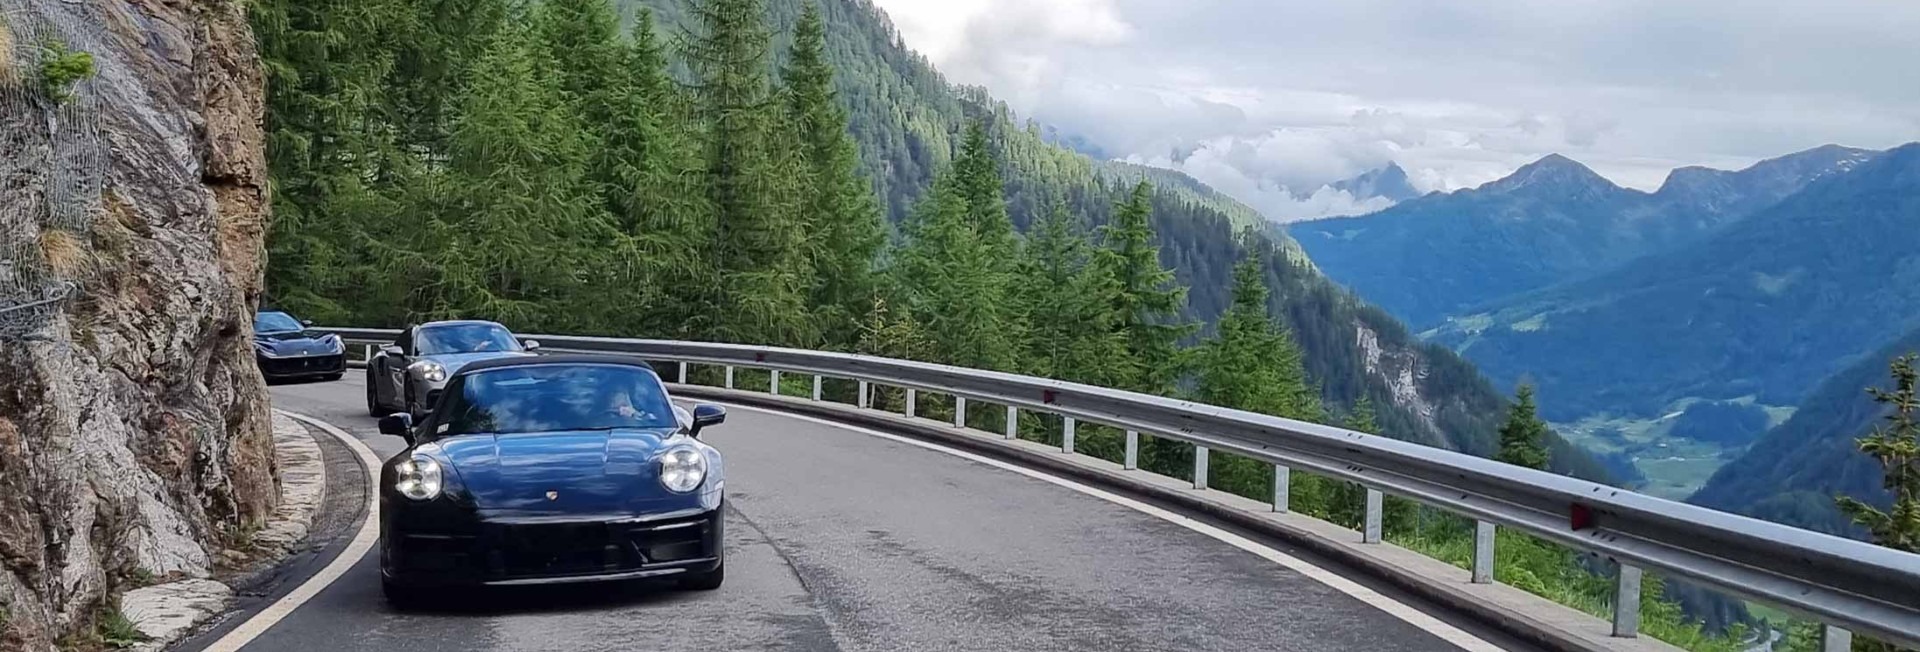 drive in motion Sports Car Tour Italy Alpine Roads